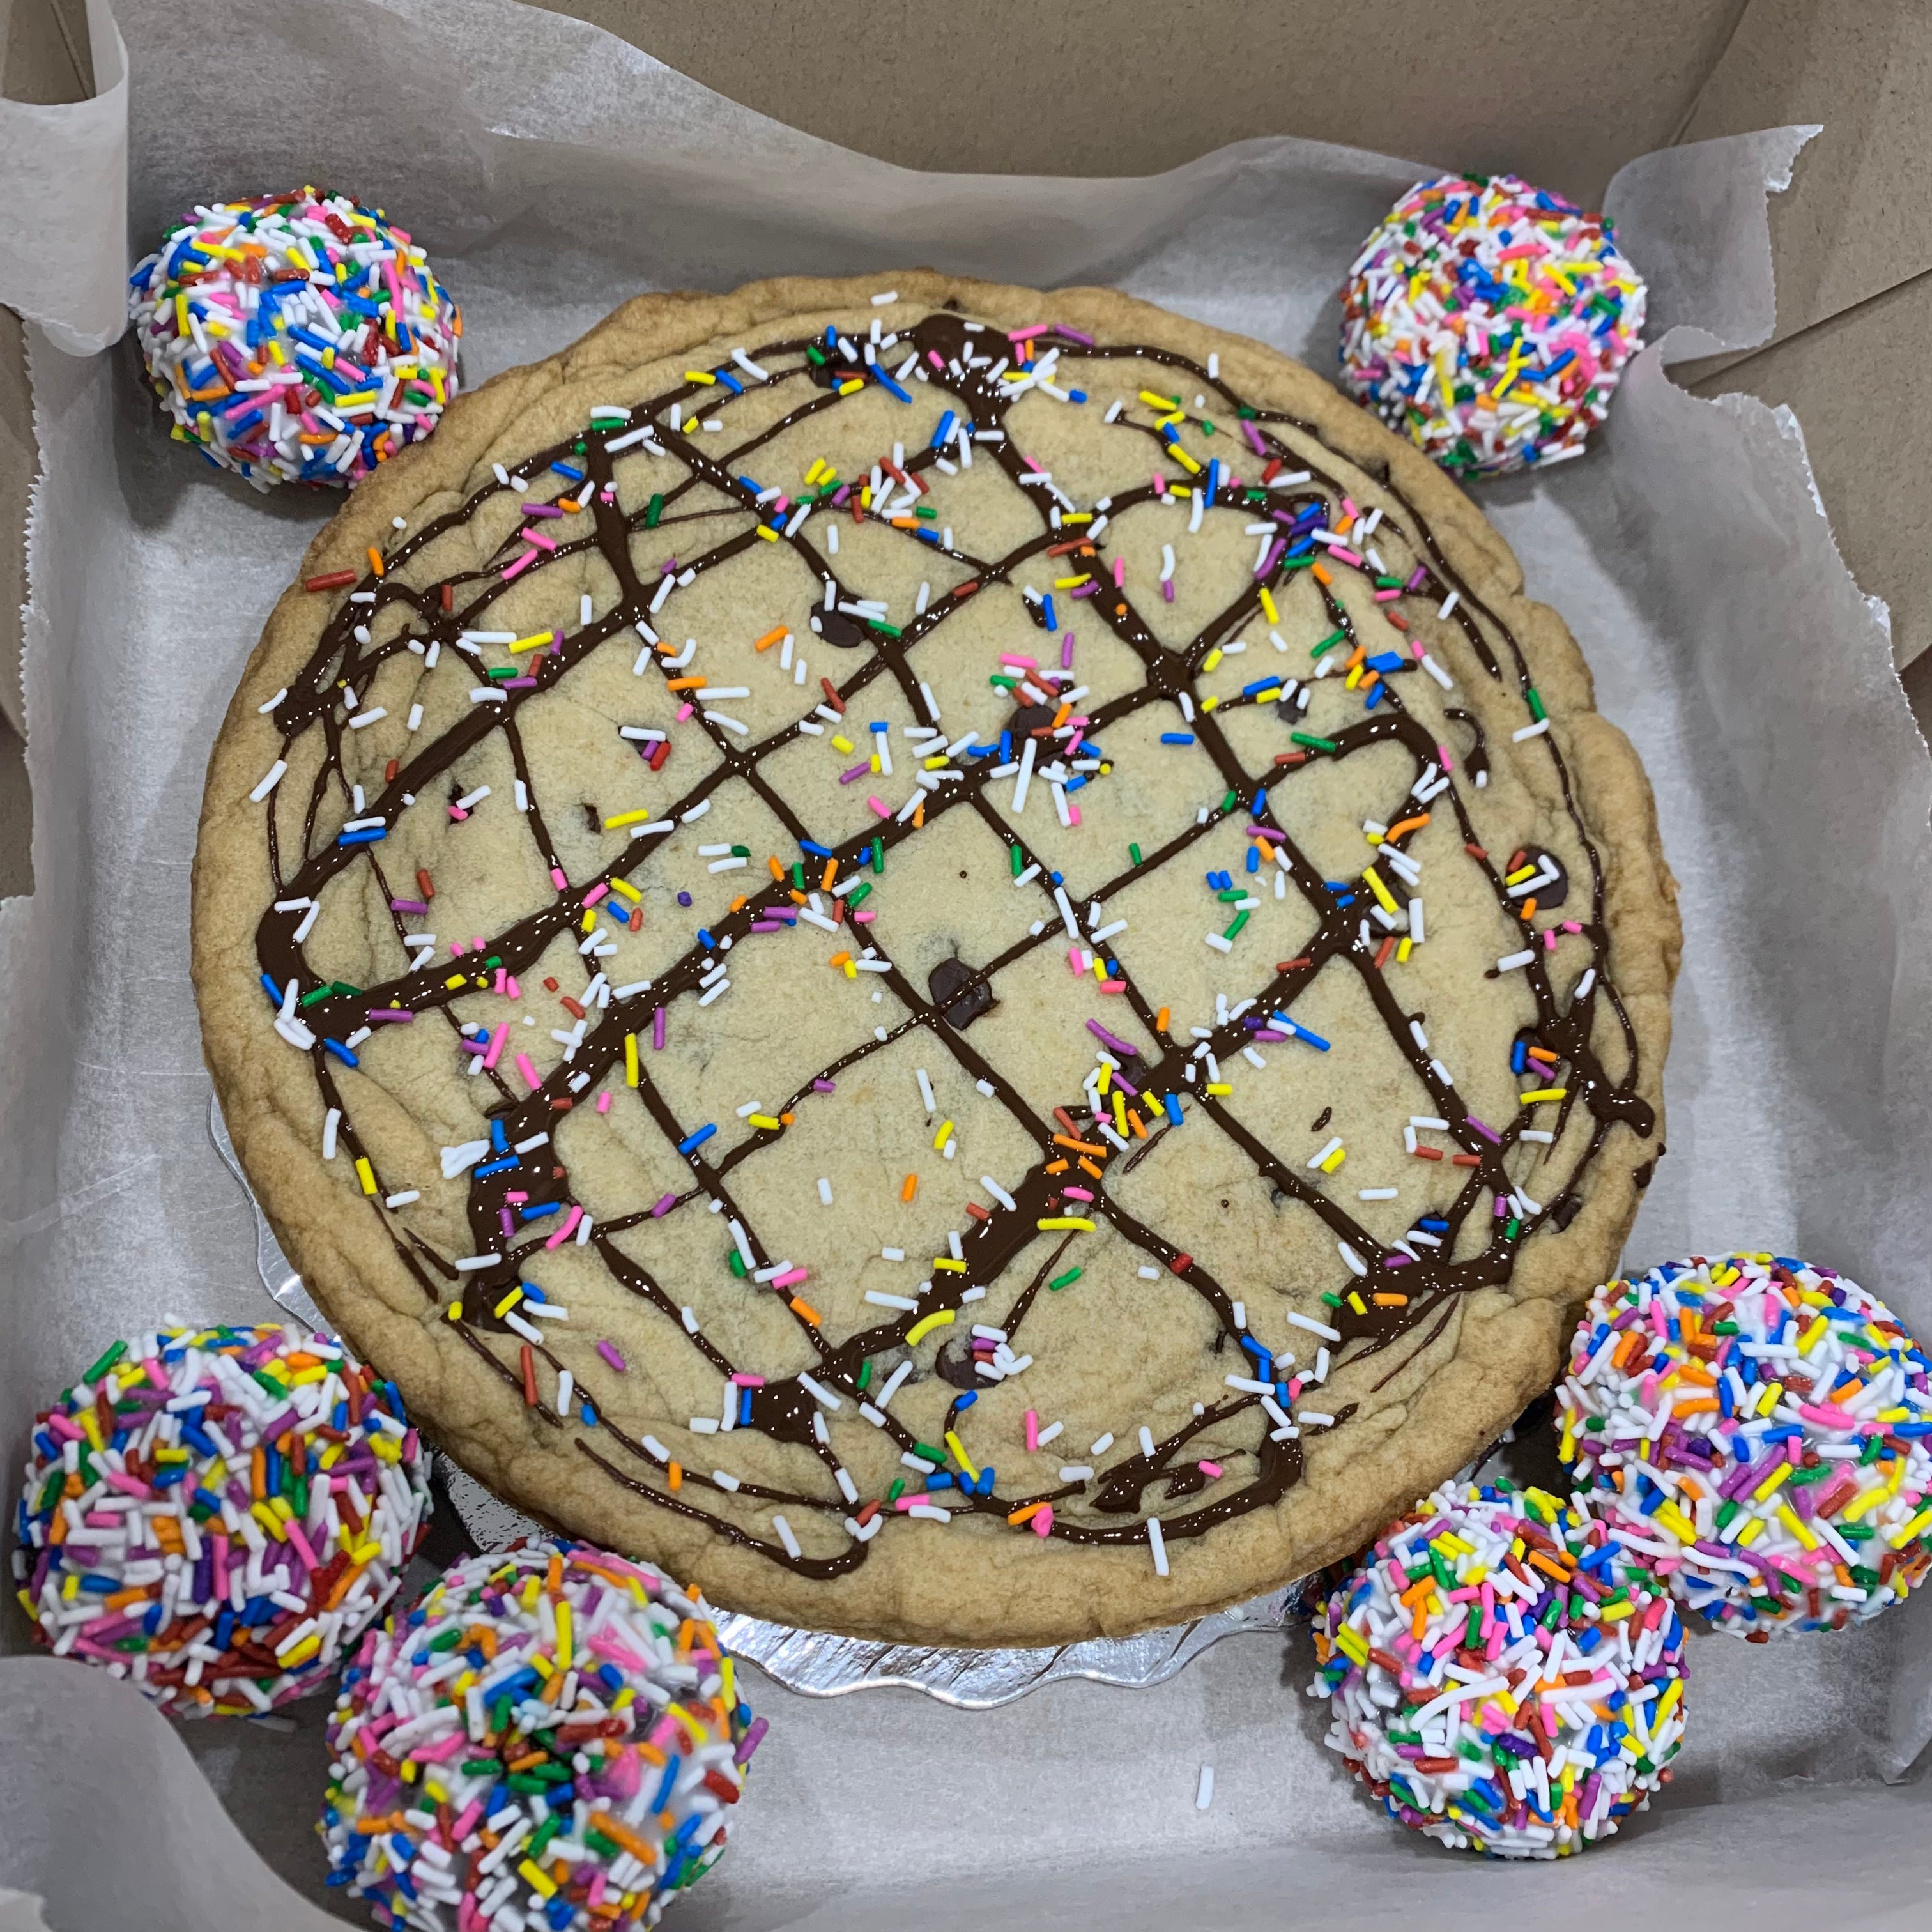 Cookie Cake and Bites Combo